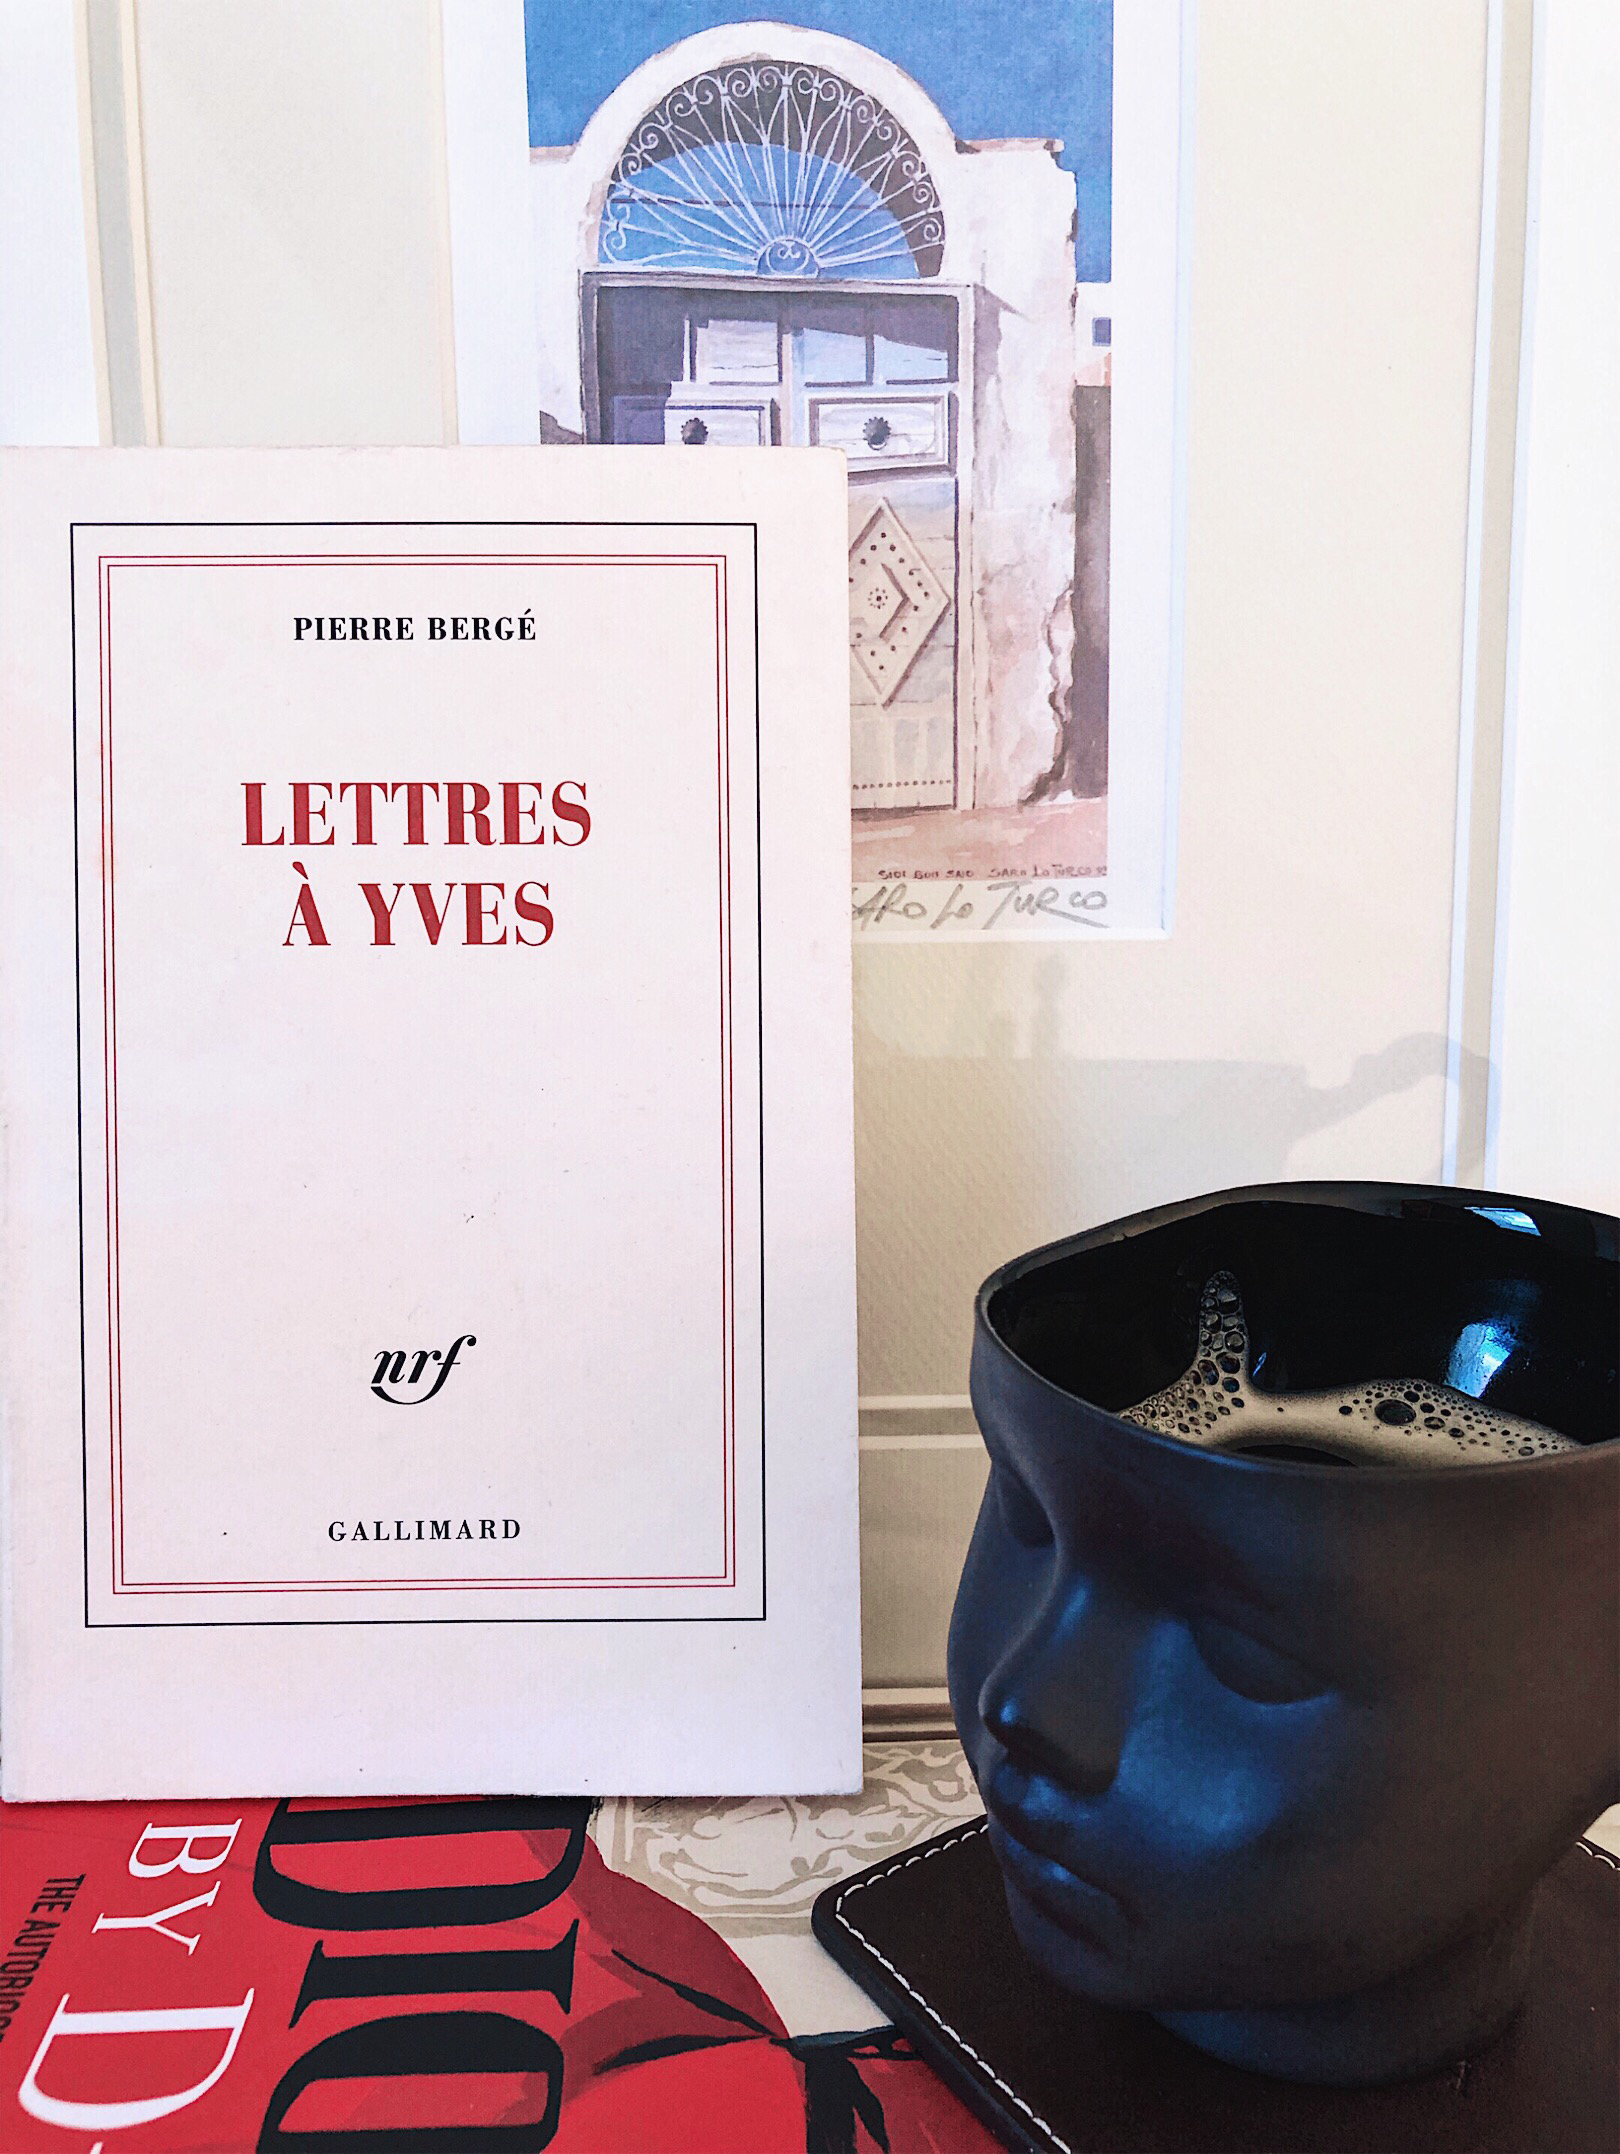 Letters to Yves book on the table